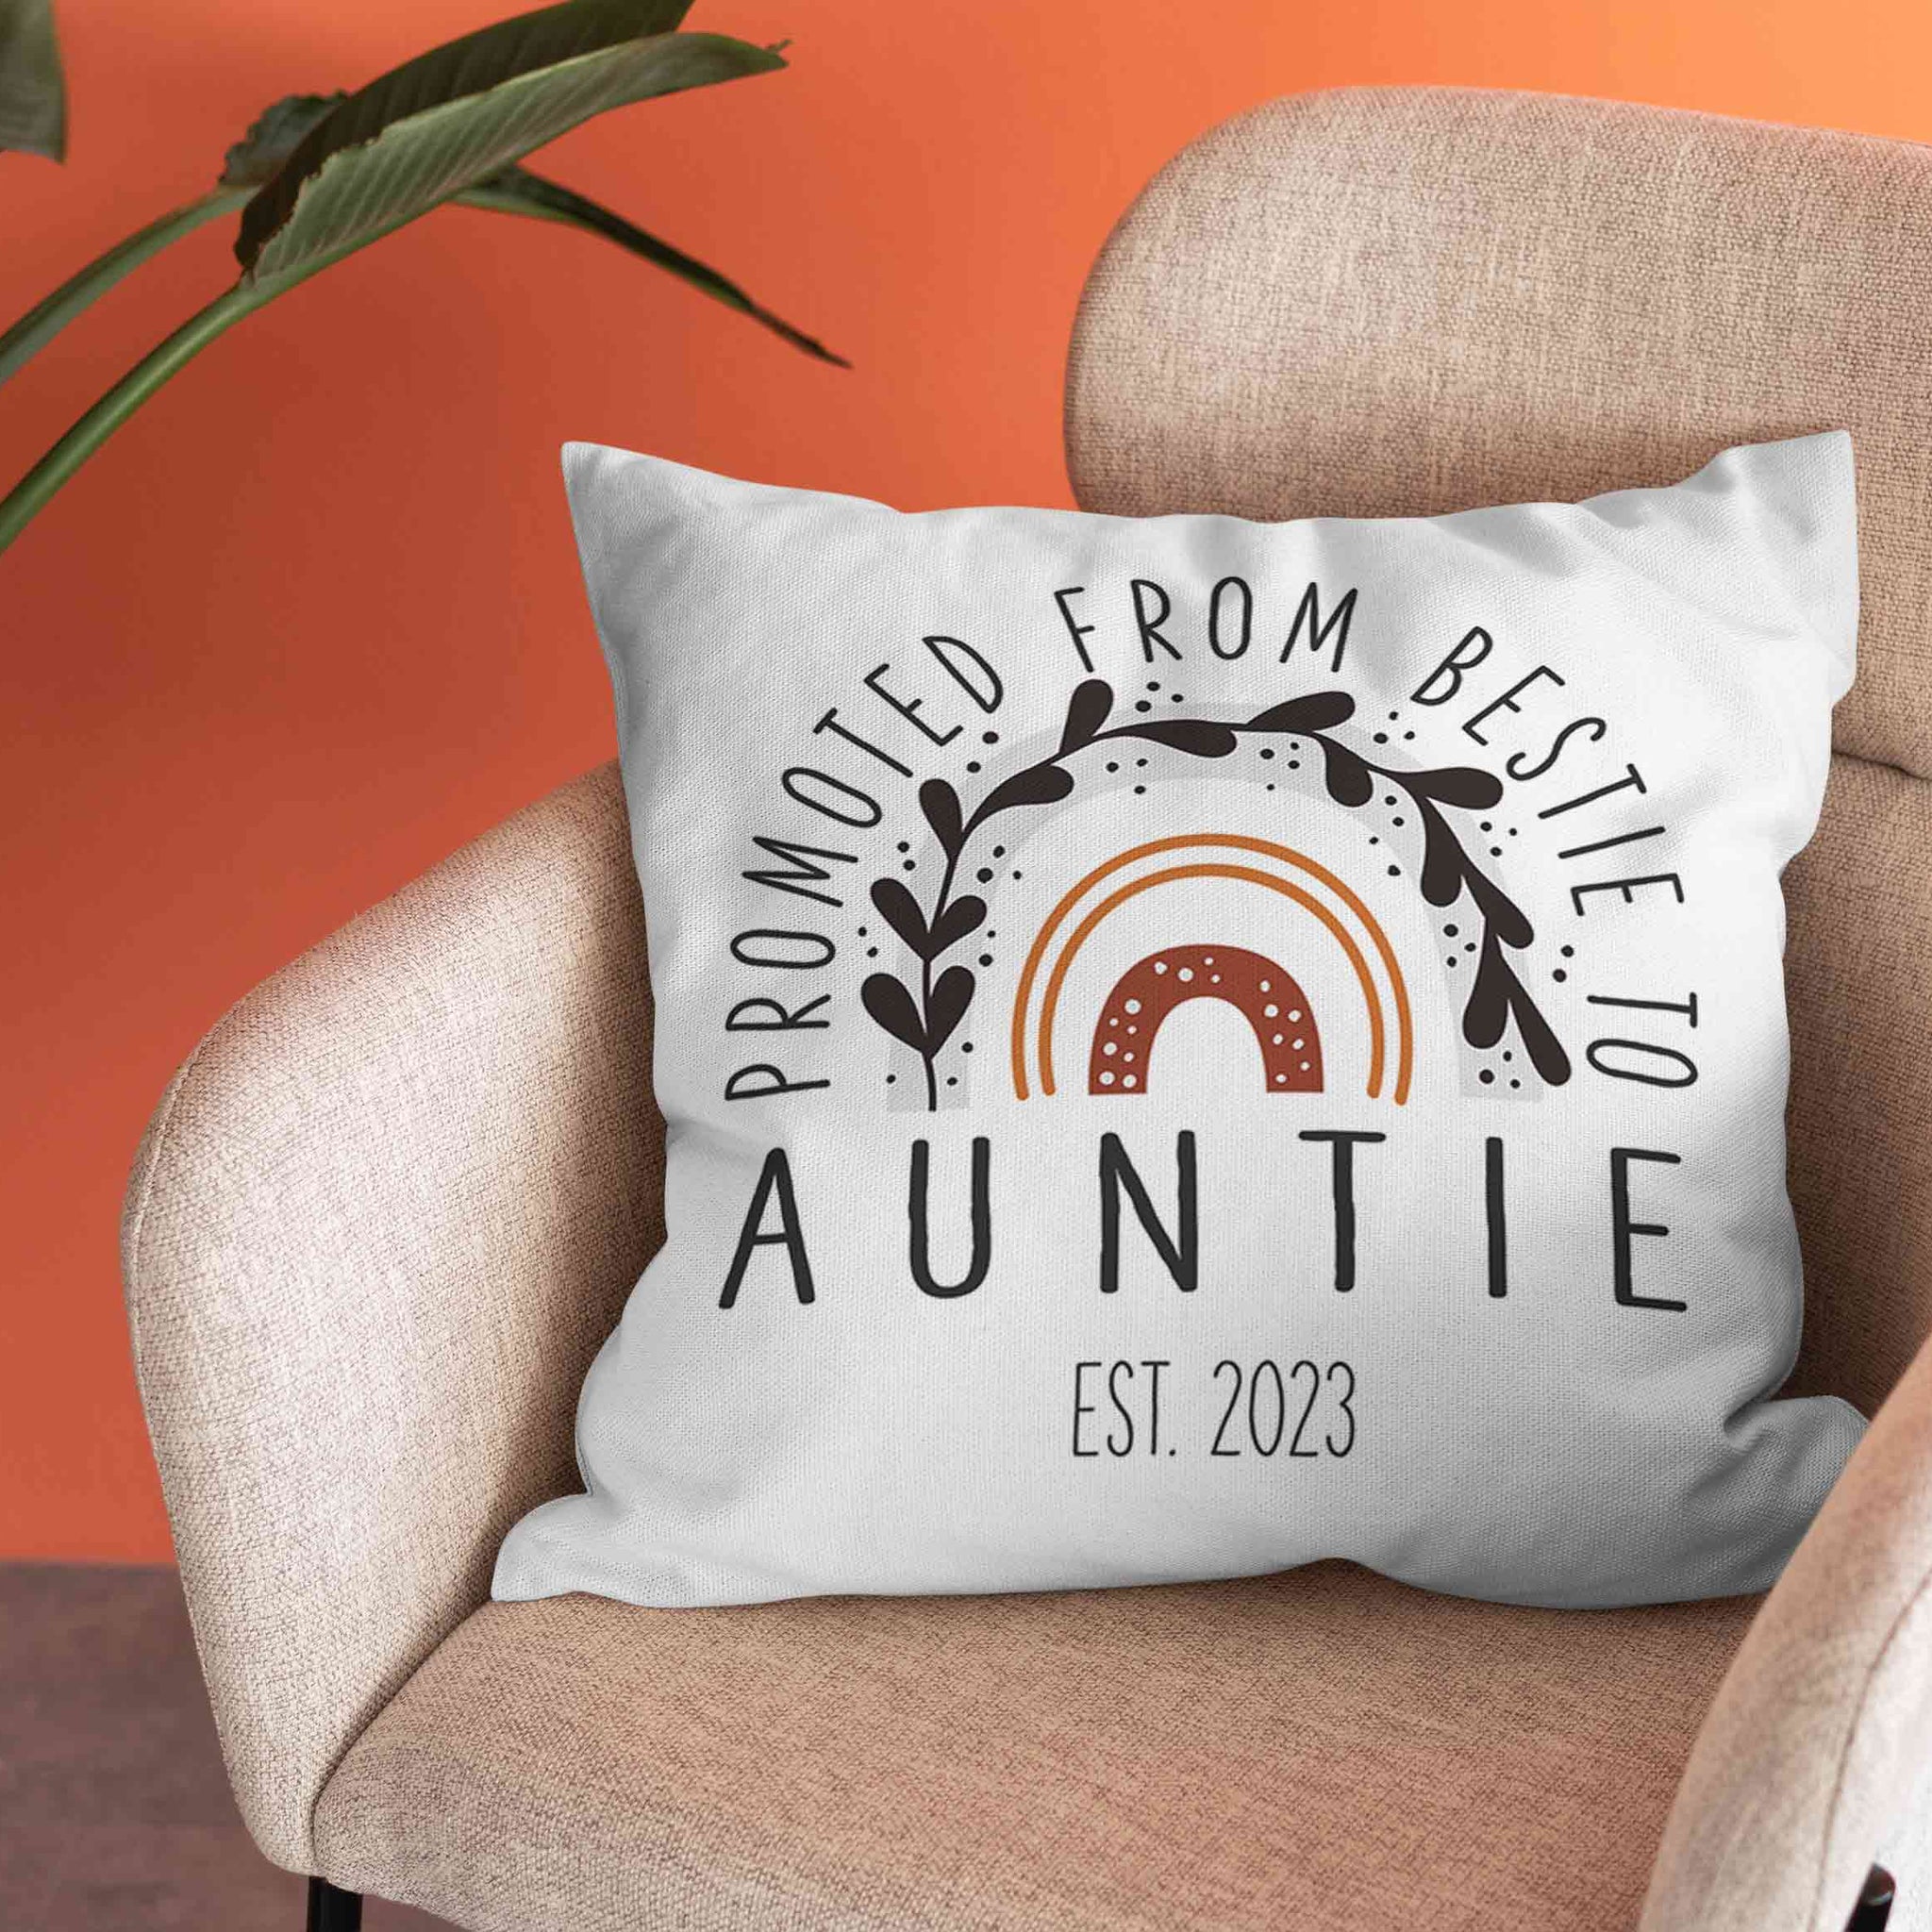 Promoted From Bestie To Auntie Pillow, Boho Rainbow Pillow, Custom Name Pillow, Gift Pillow For Aunt